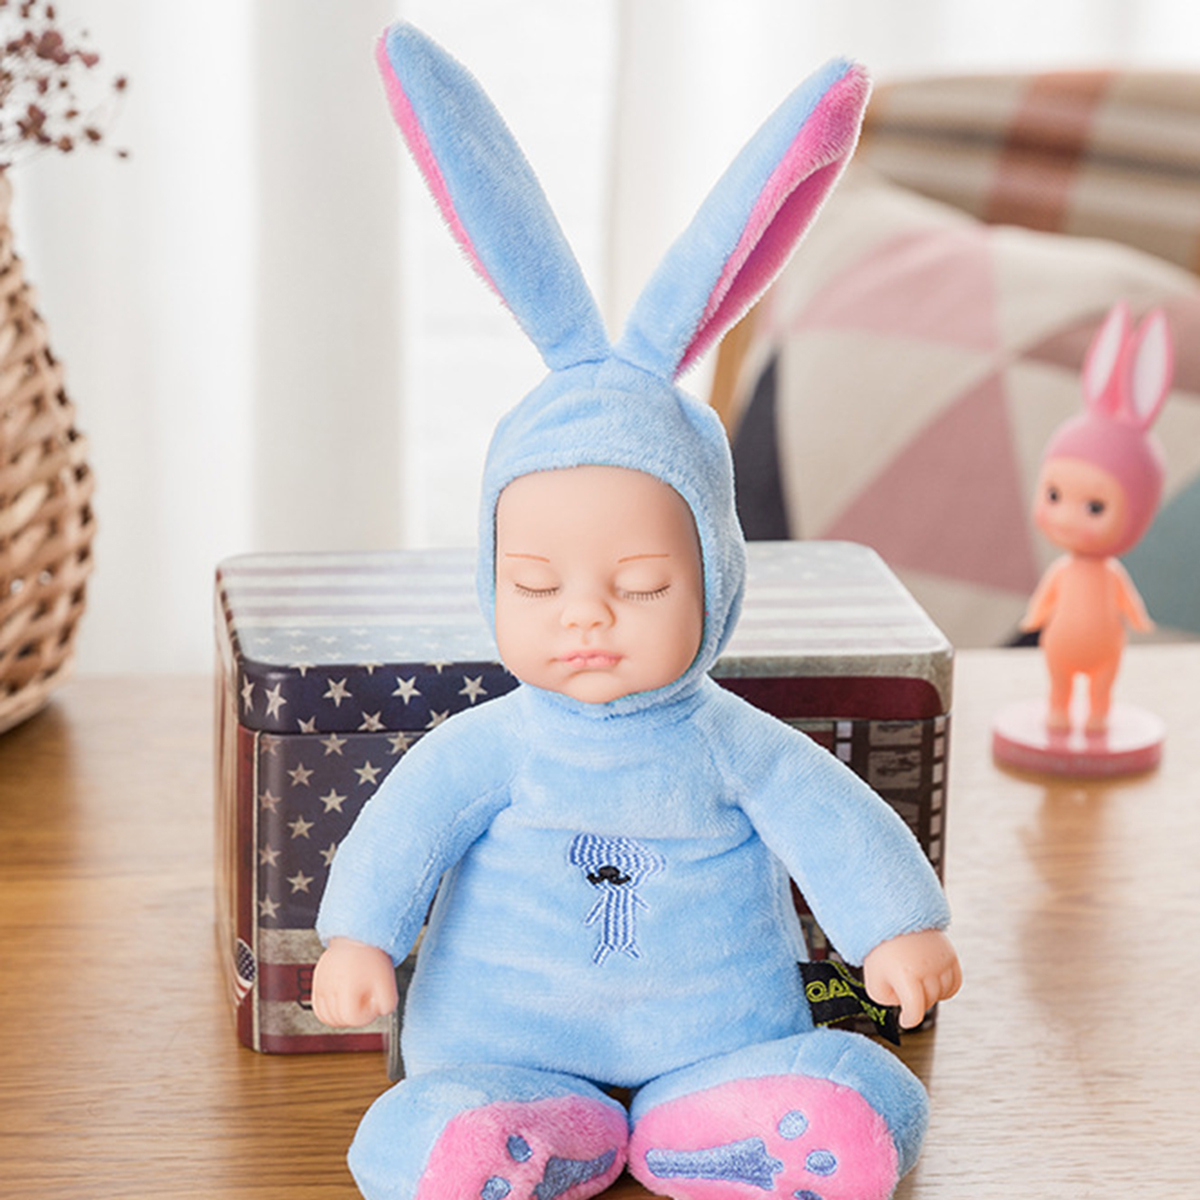 23CM-Soft-Silicone-Vinyl-Lifelike-Realistic-Reborn-Cute-Bear-Rabbit-Doll-Toy-with-Clothes-1722622-10